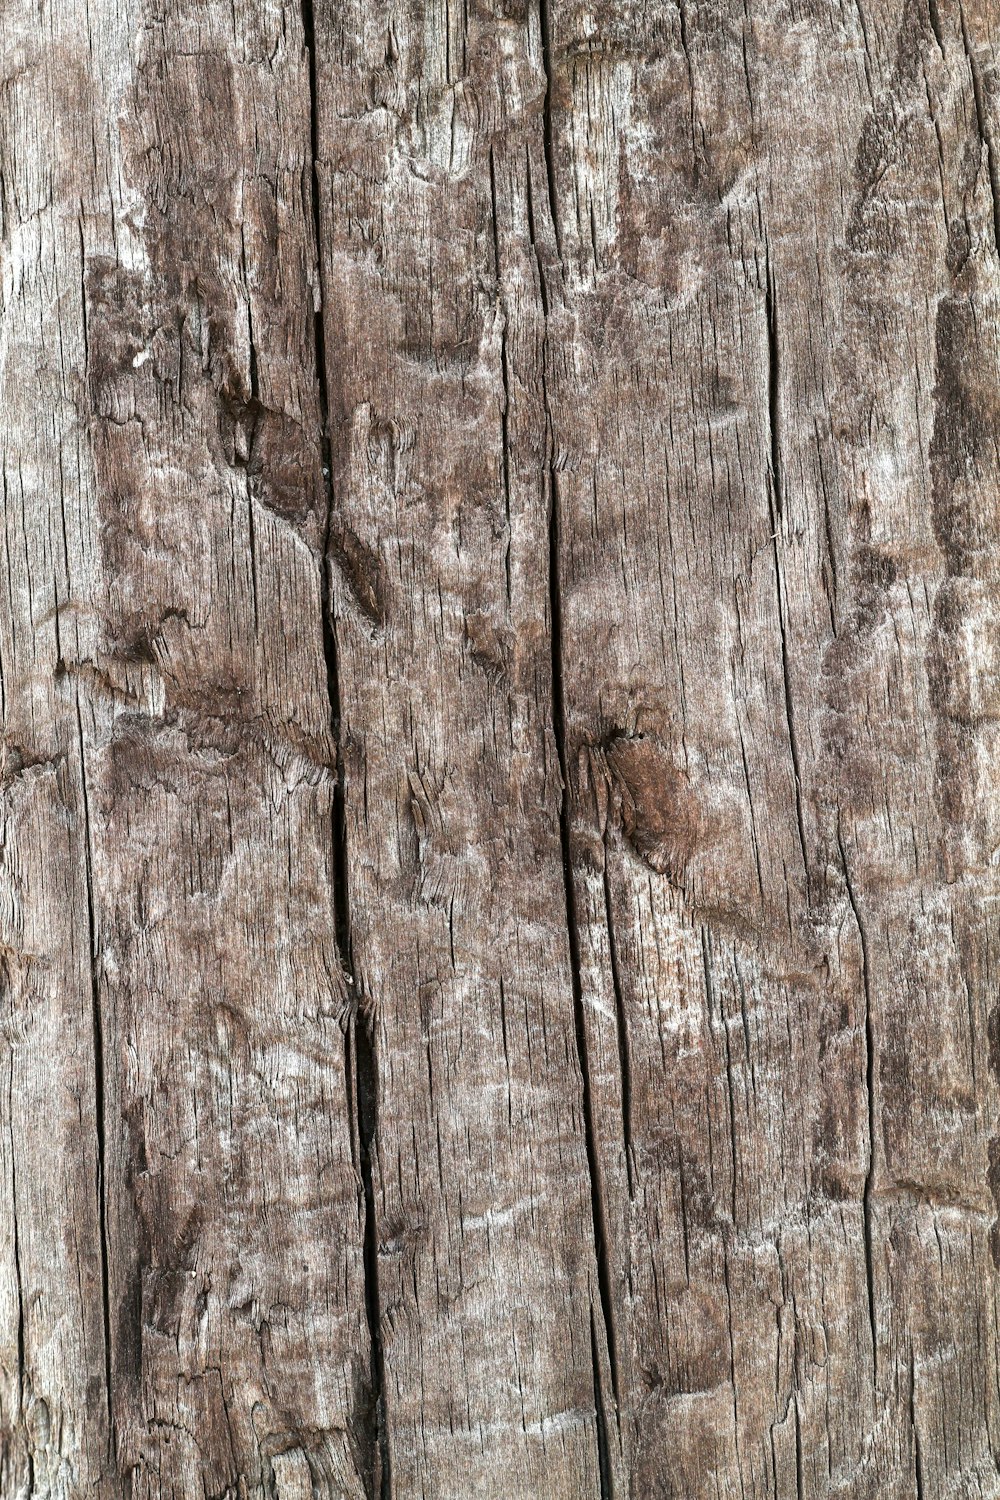 a bird is perched on a piece of wood